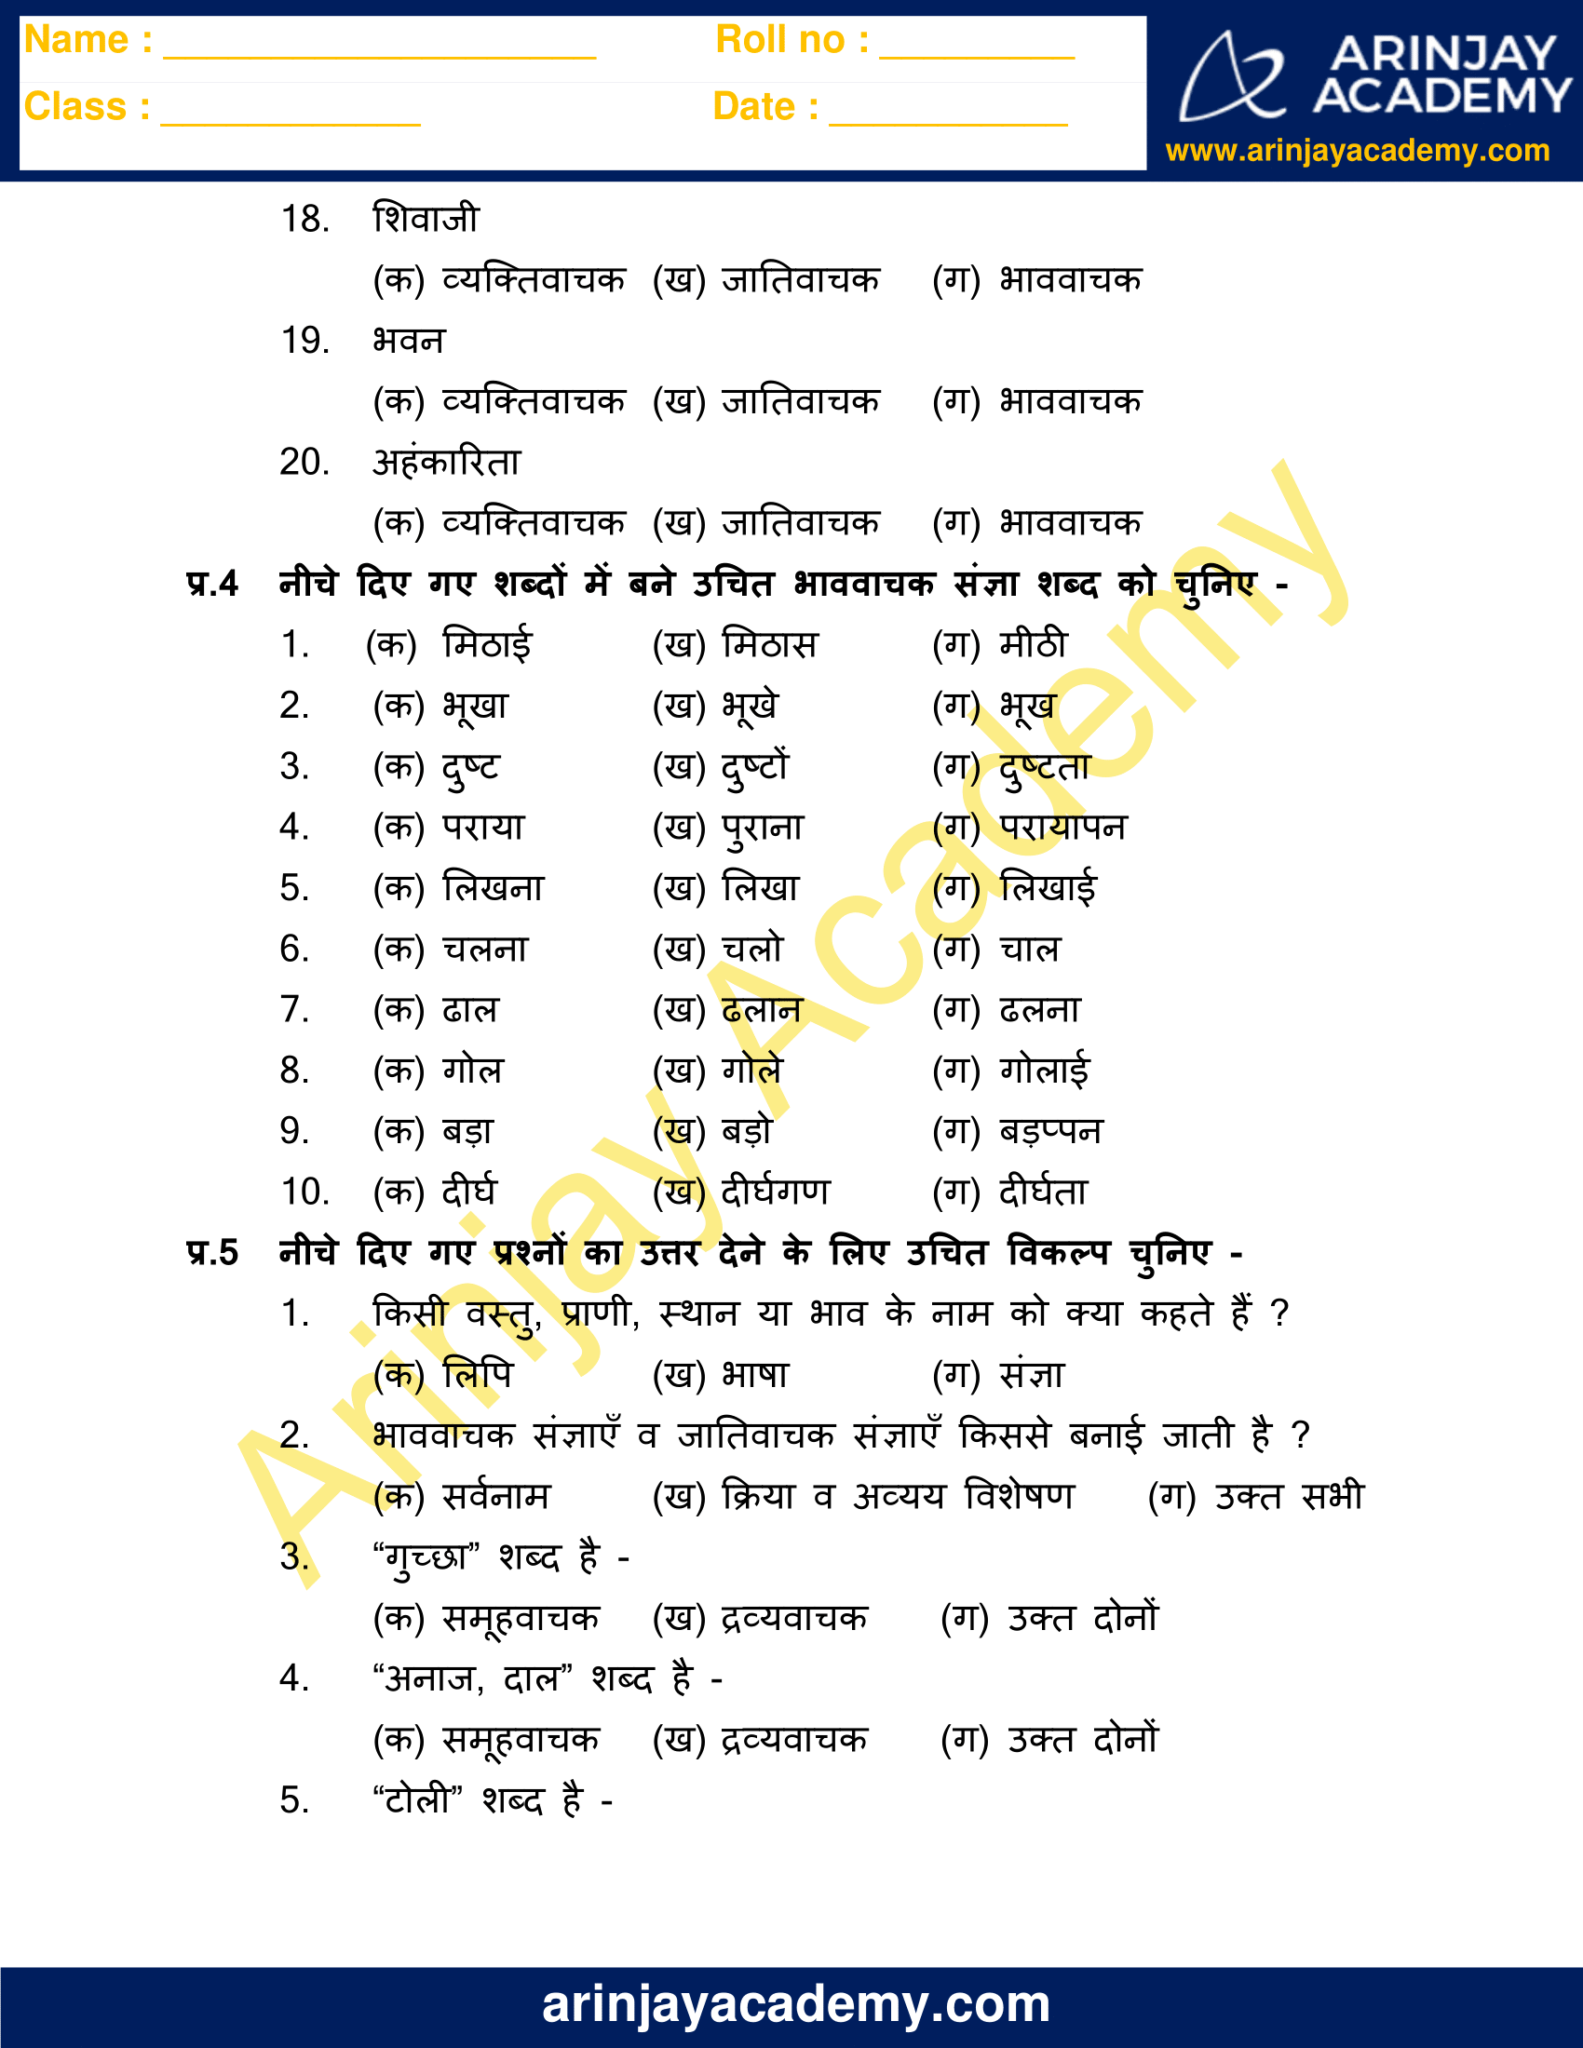 sangya-worksheet-for-class-5-free-and-printable-arinjay-academy